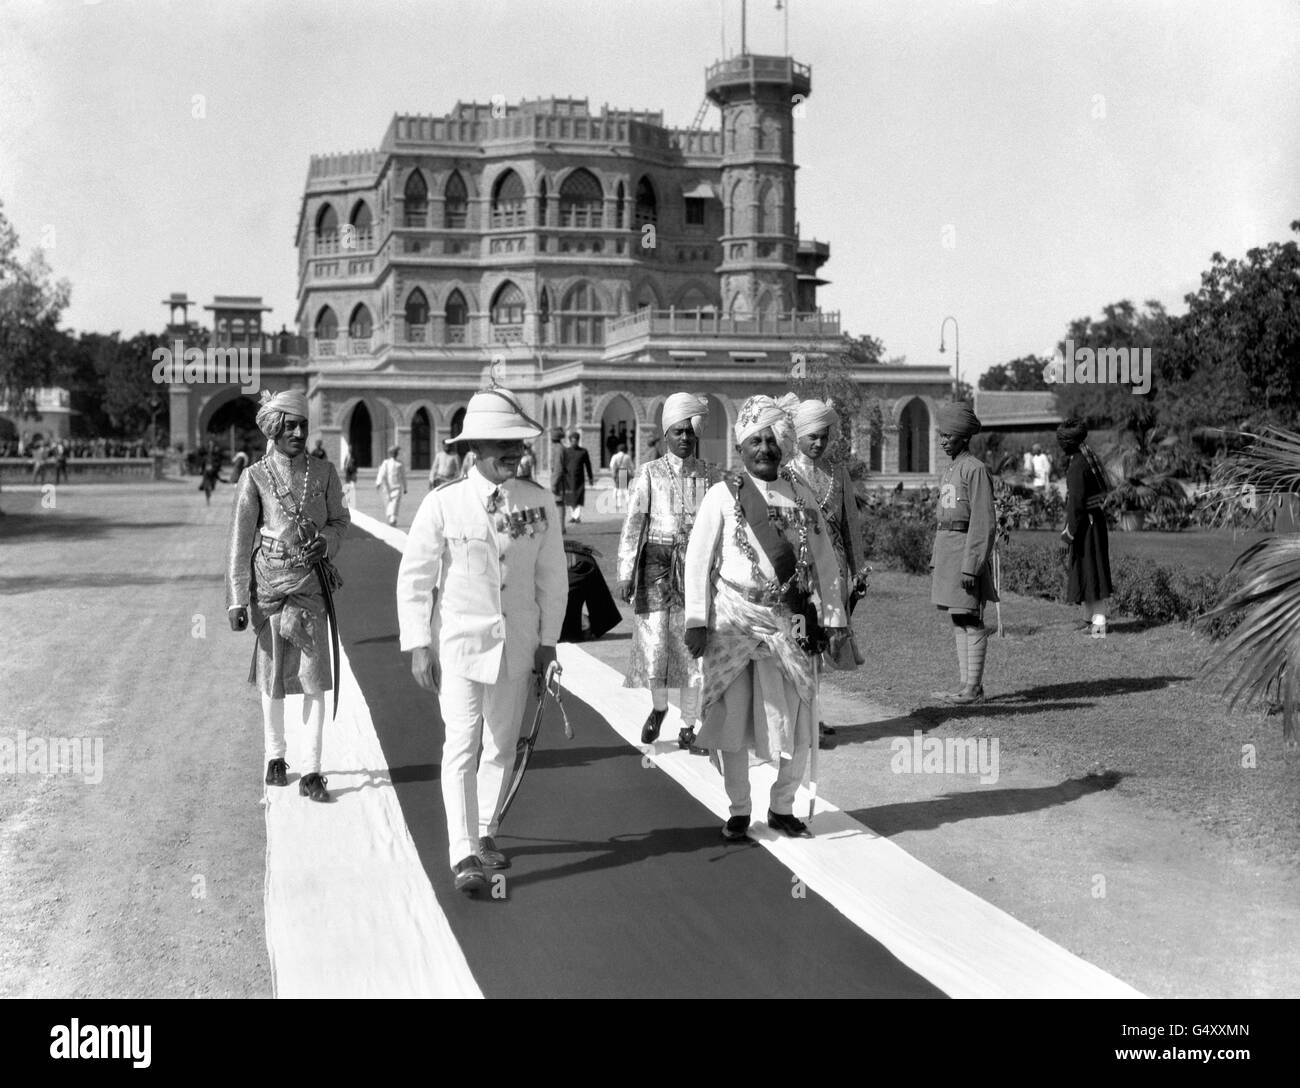 The Prince of Wales' tour of Japan and India. The Maharajah Regent (r) - Sir Pertub Singh - returning with a British official from the palace after his visit to the Prince of Wales. Stock Photo